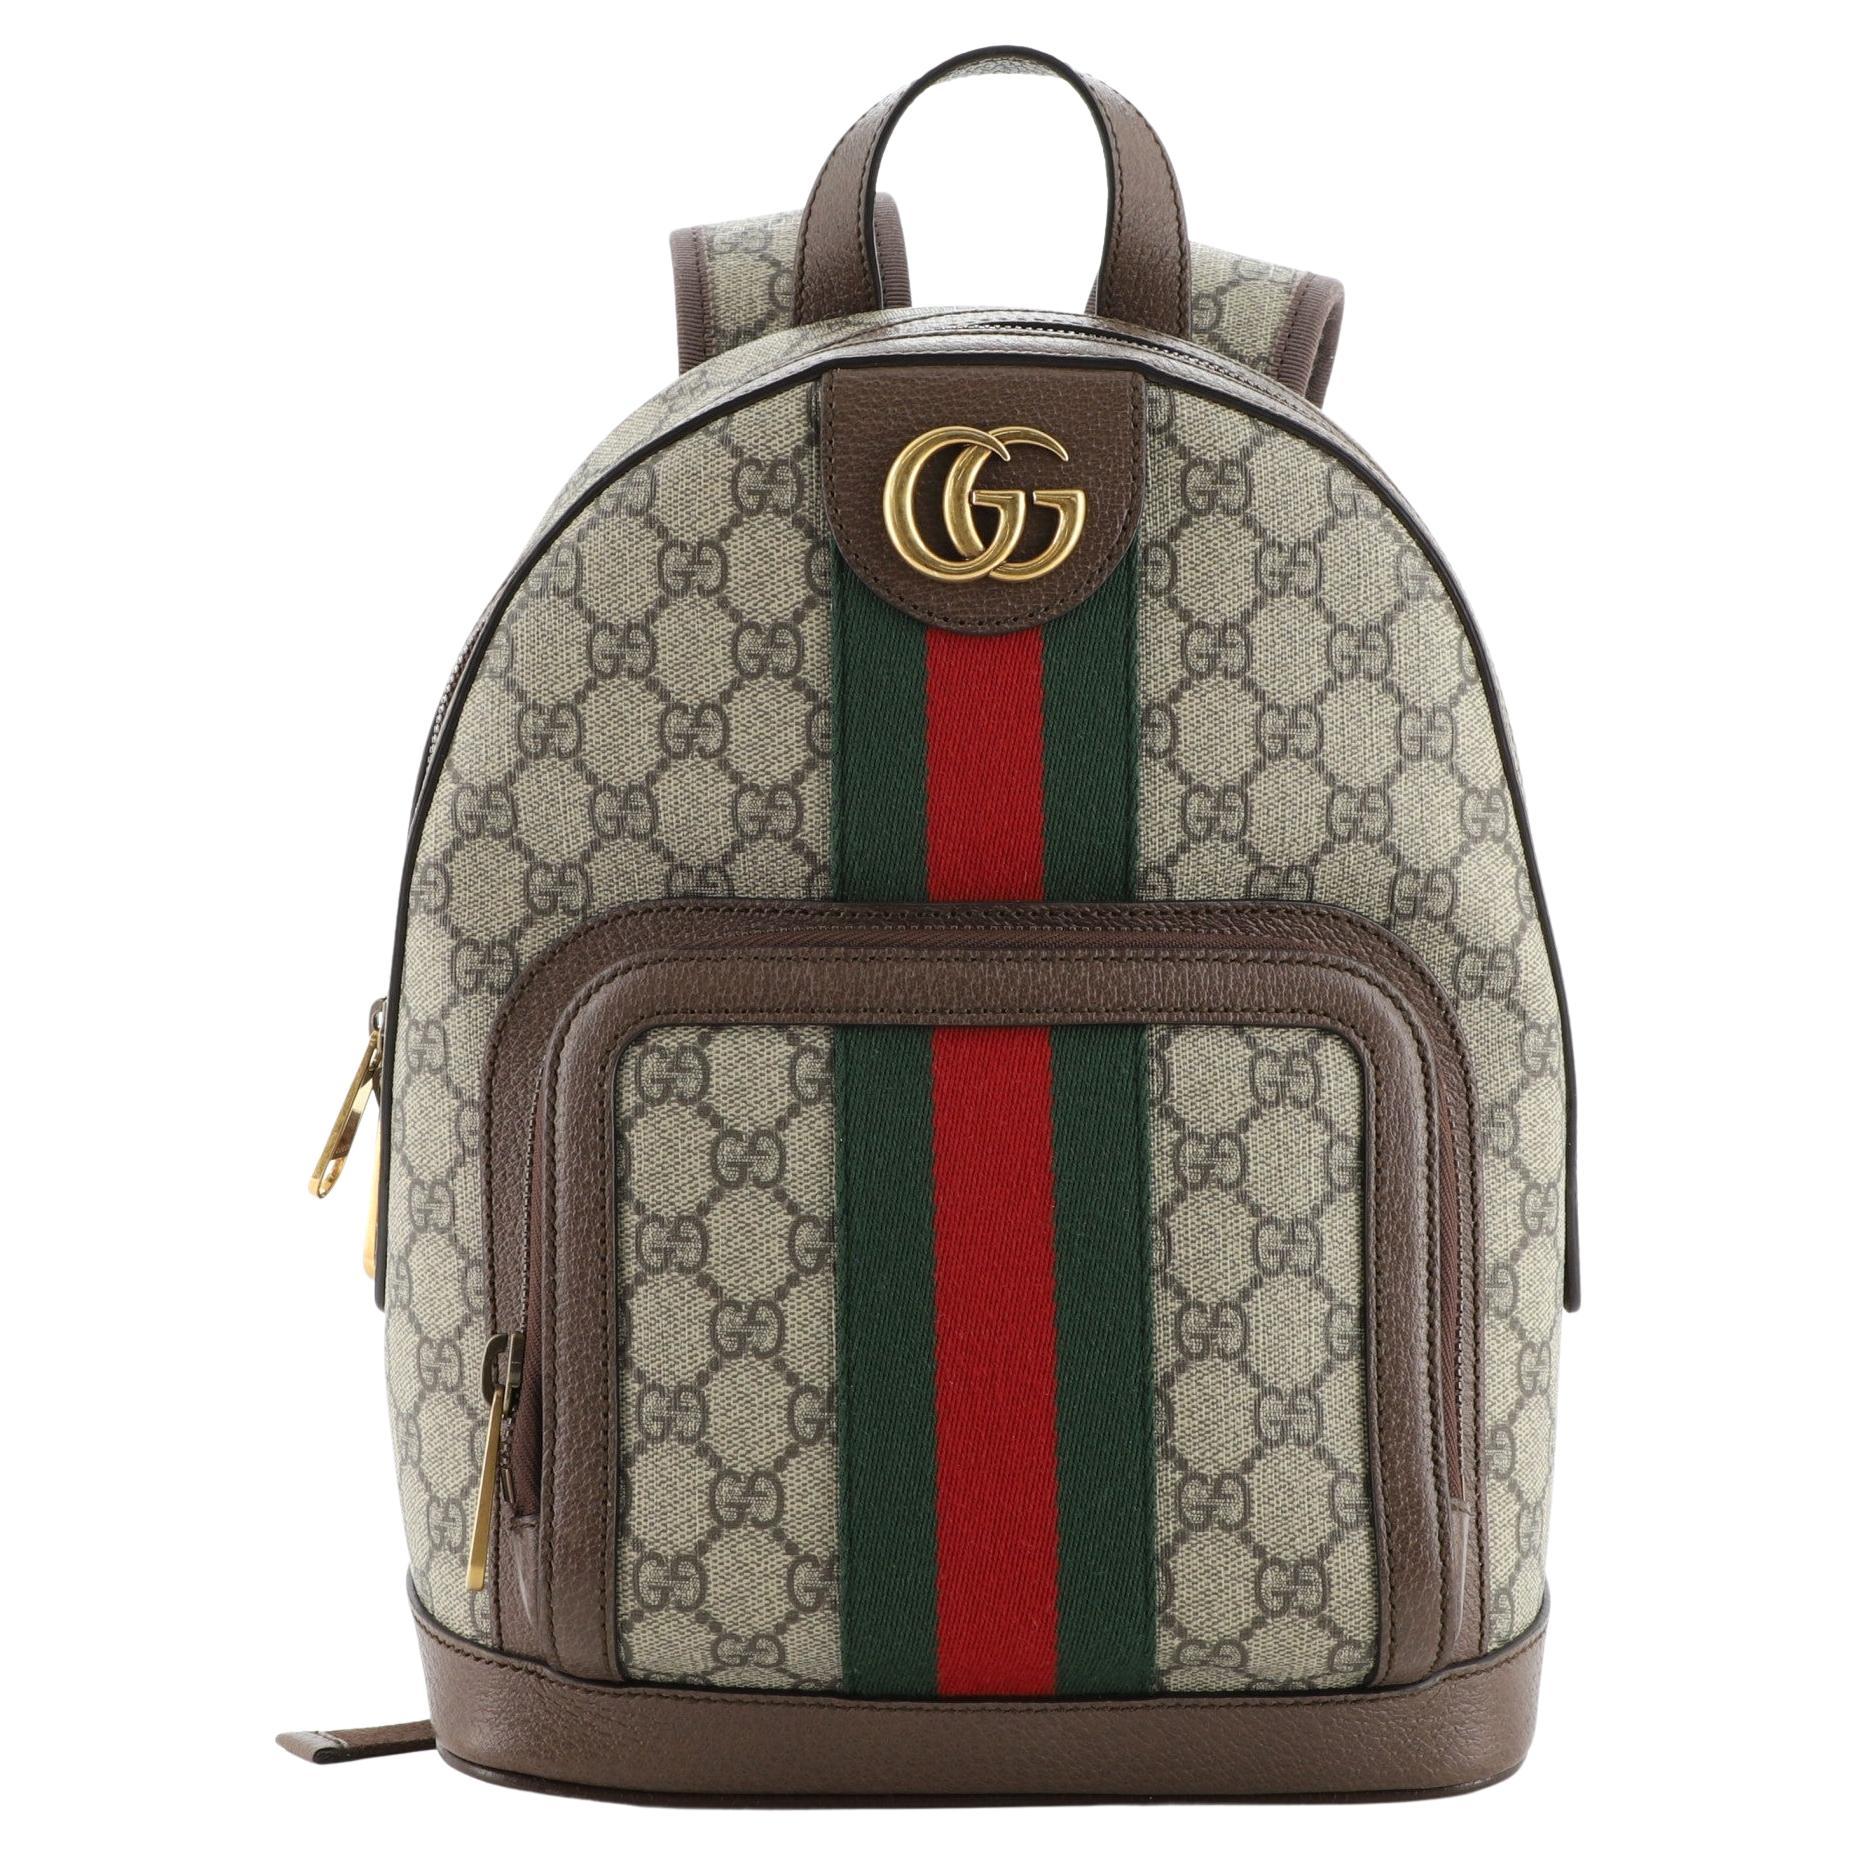 Gucci Color Block Printed Canvas Leather Sling Backpack Bag, 1980s at ...